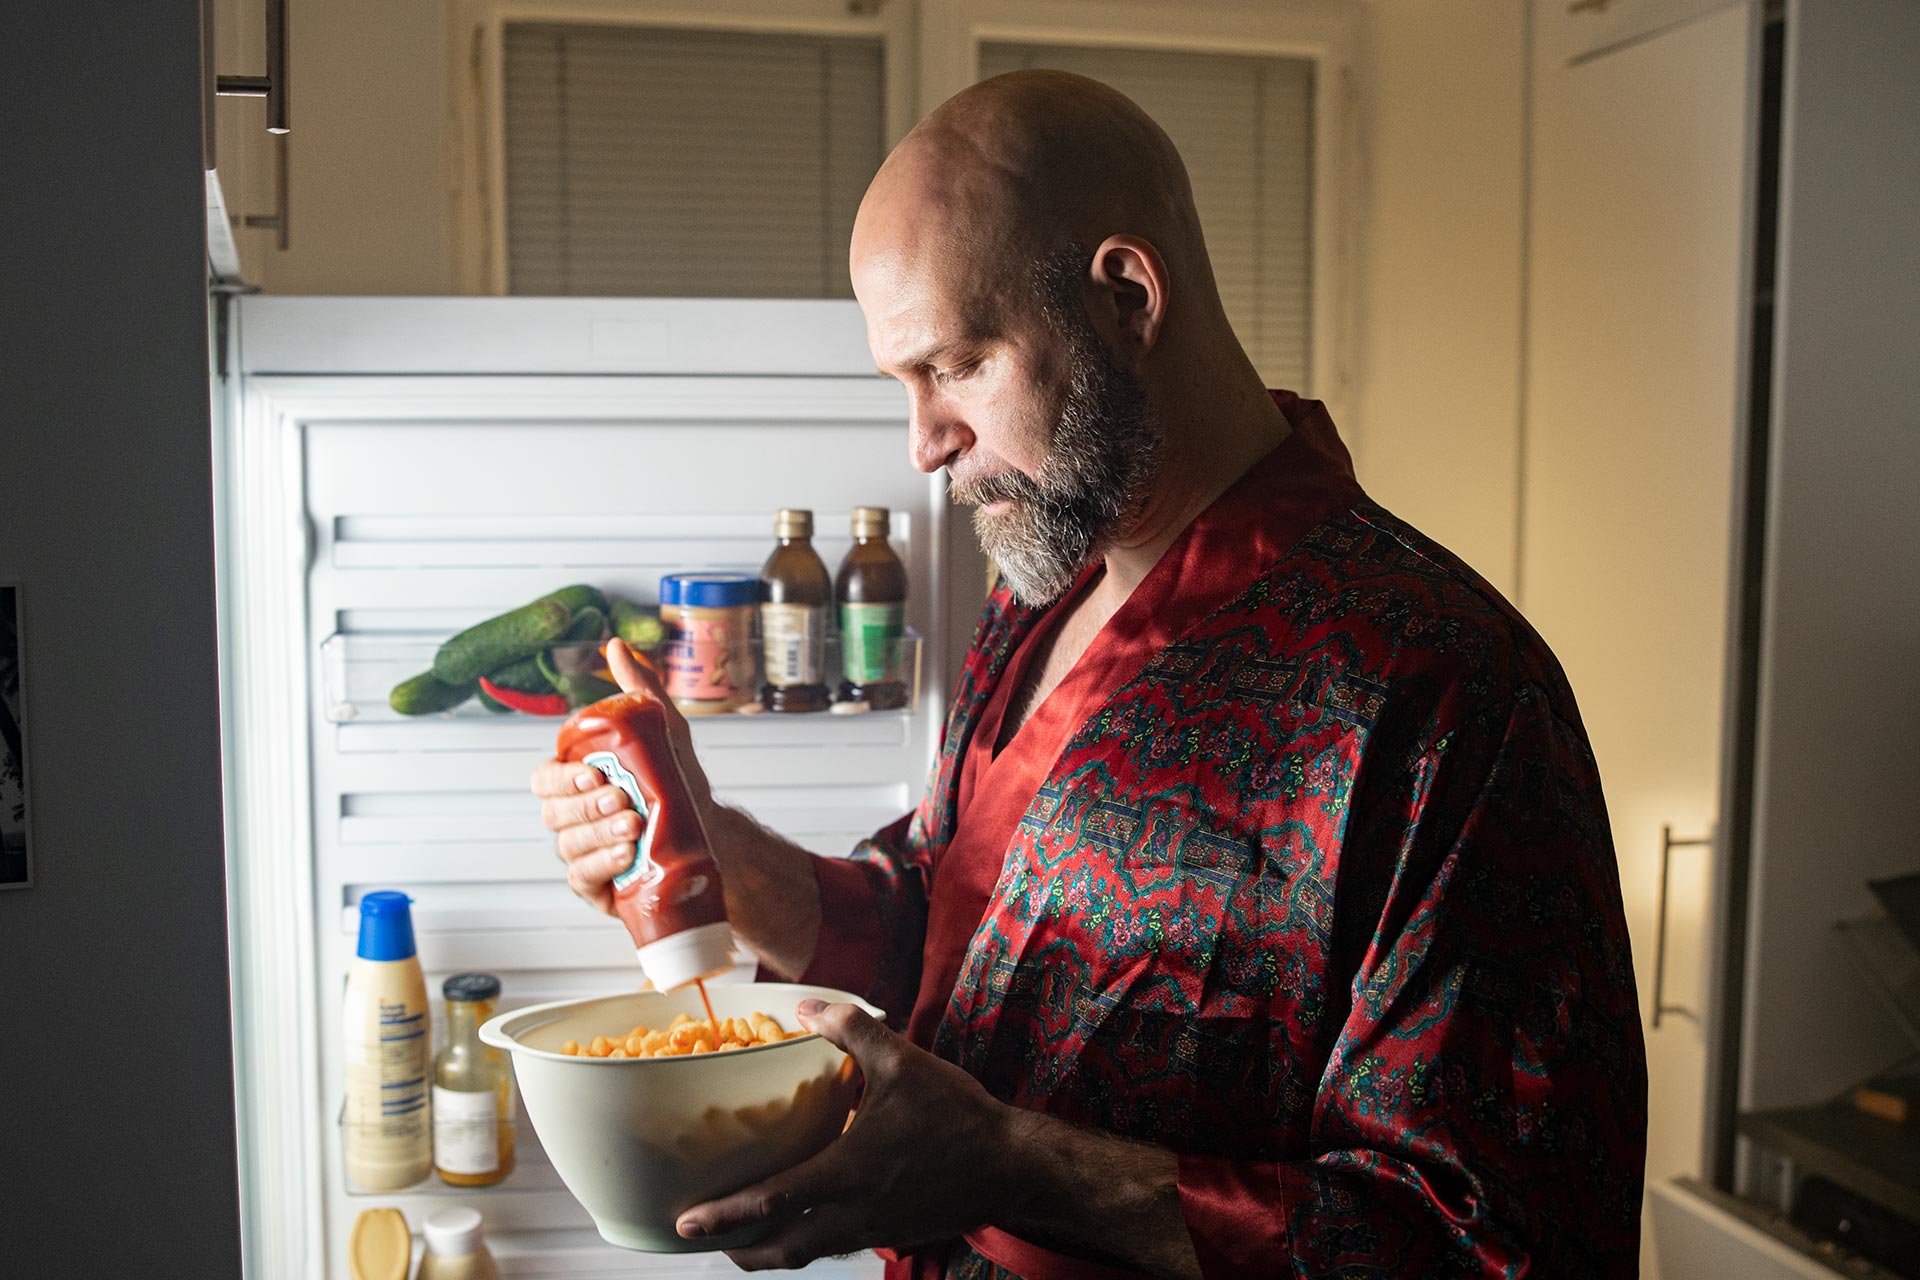 A man is eating food from a bowl directly from the fridge.